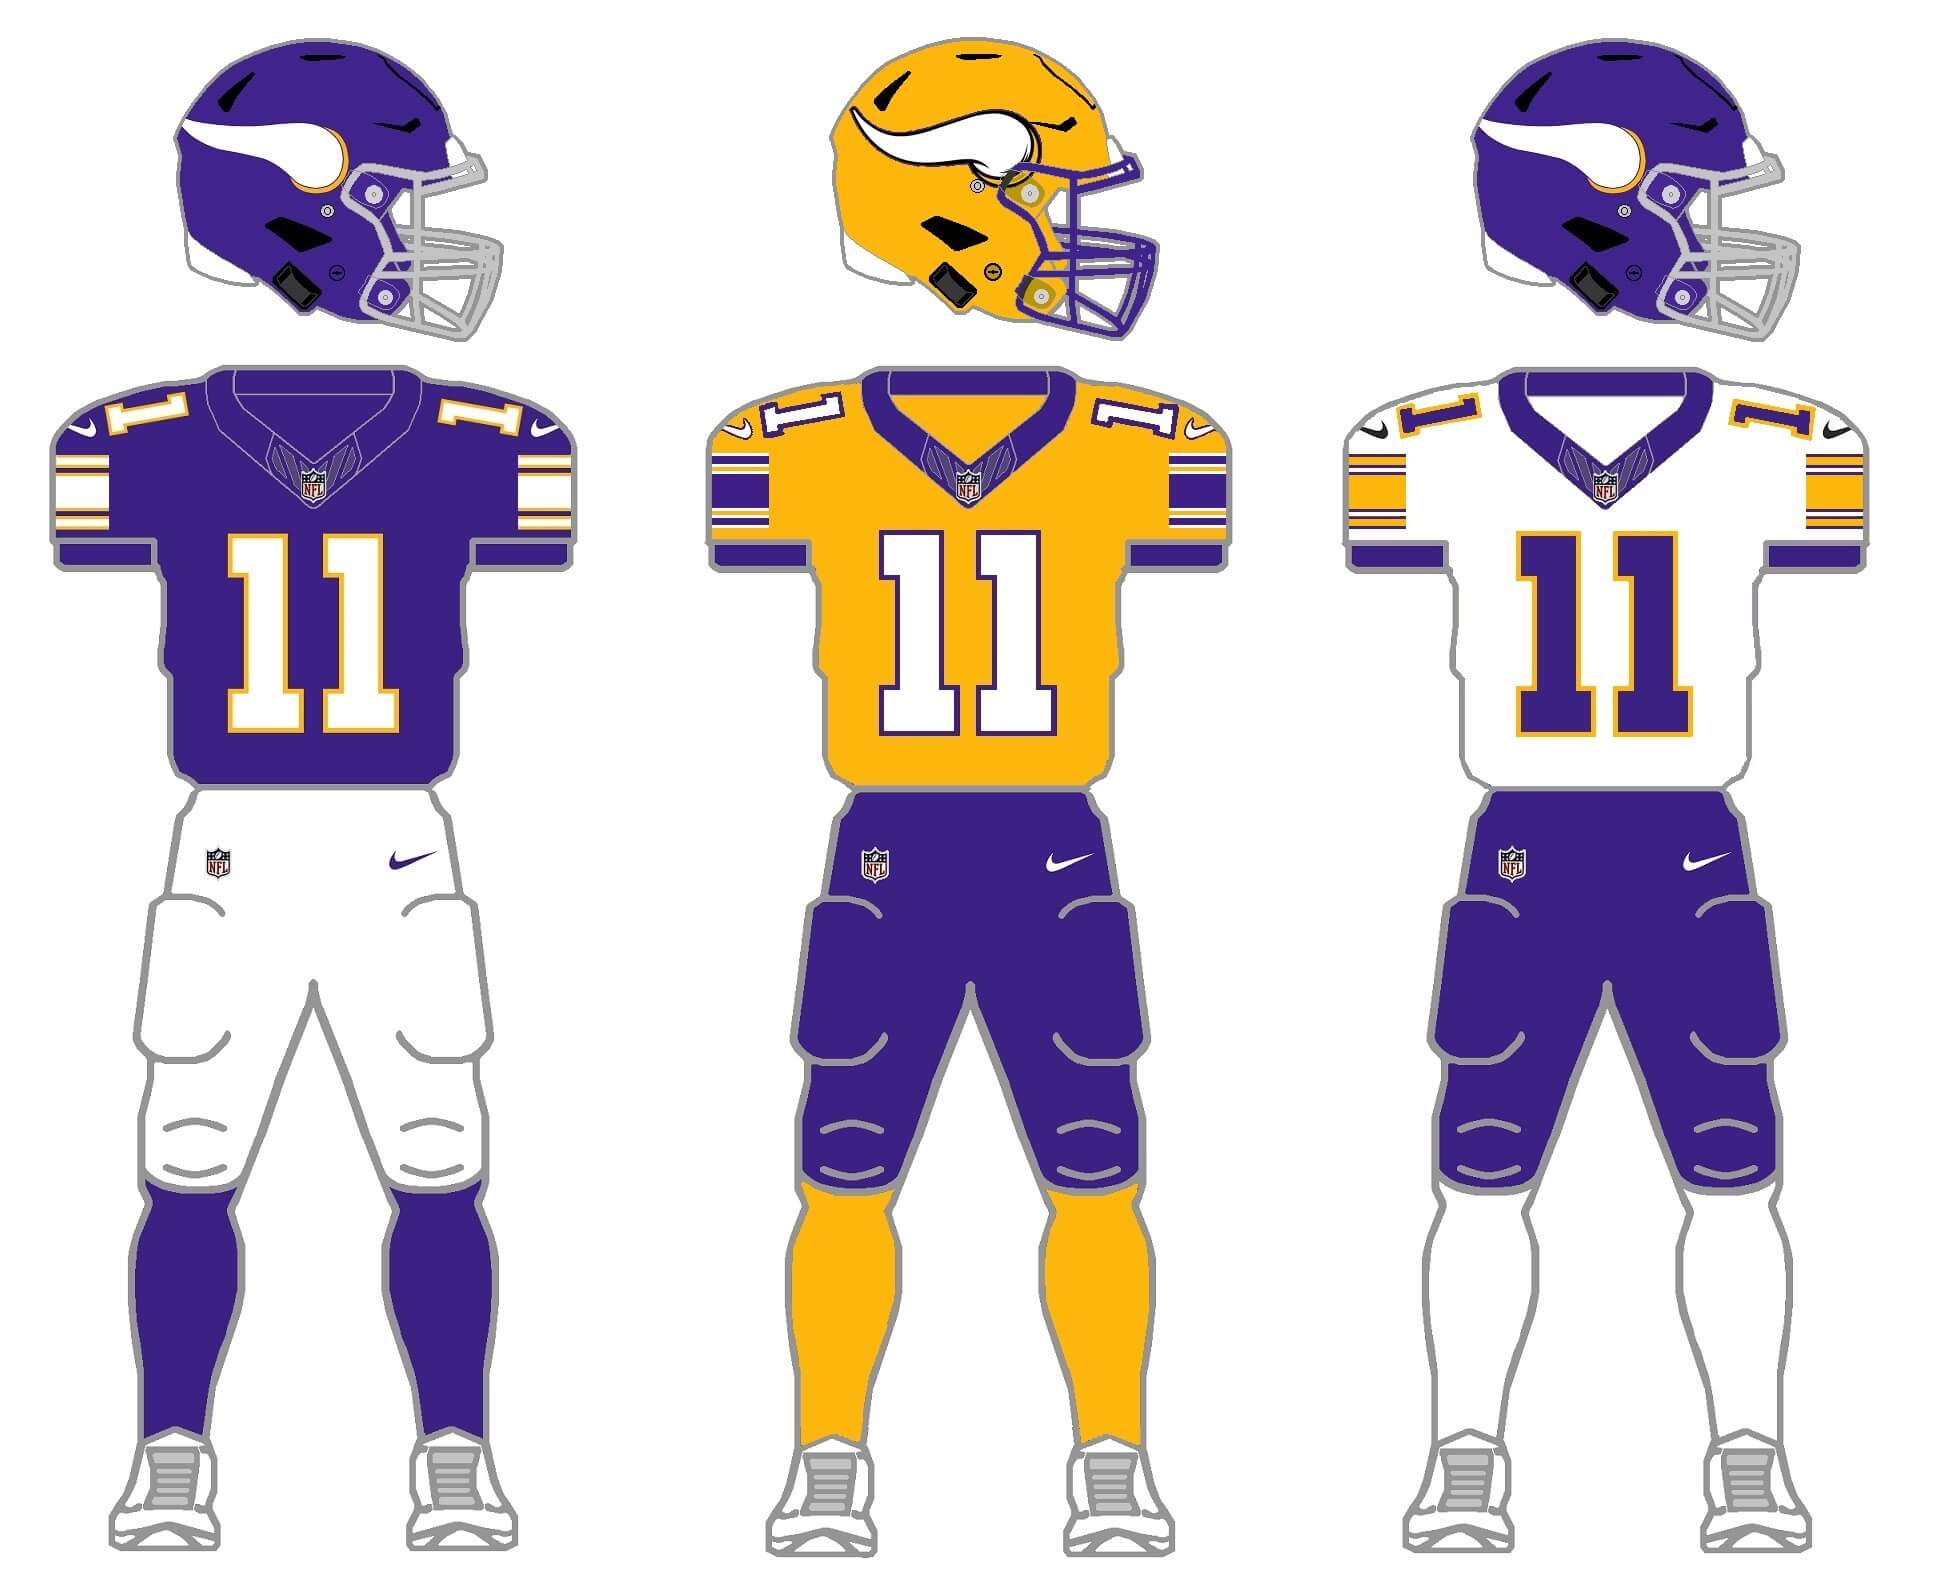 The ‘2+3+2 (+3)’ Project: NFC North Division | Uni Watch